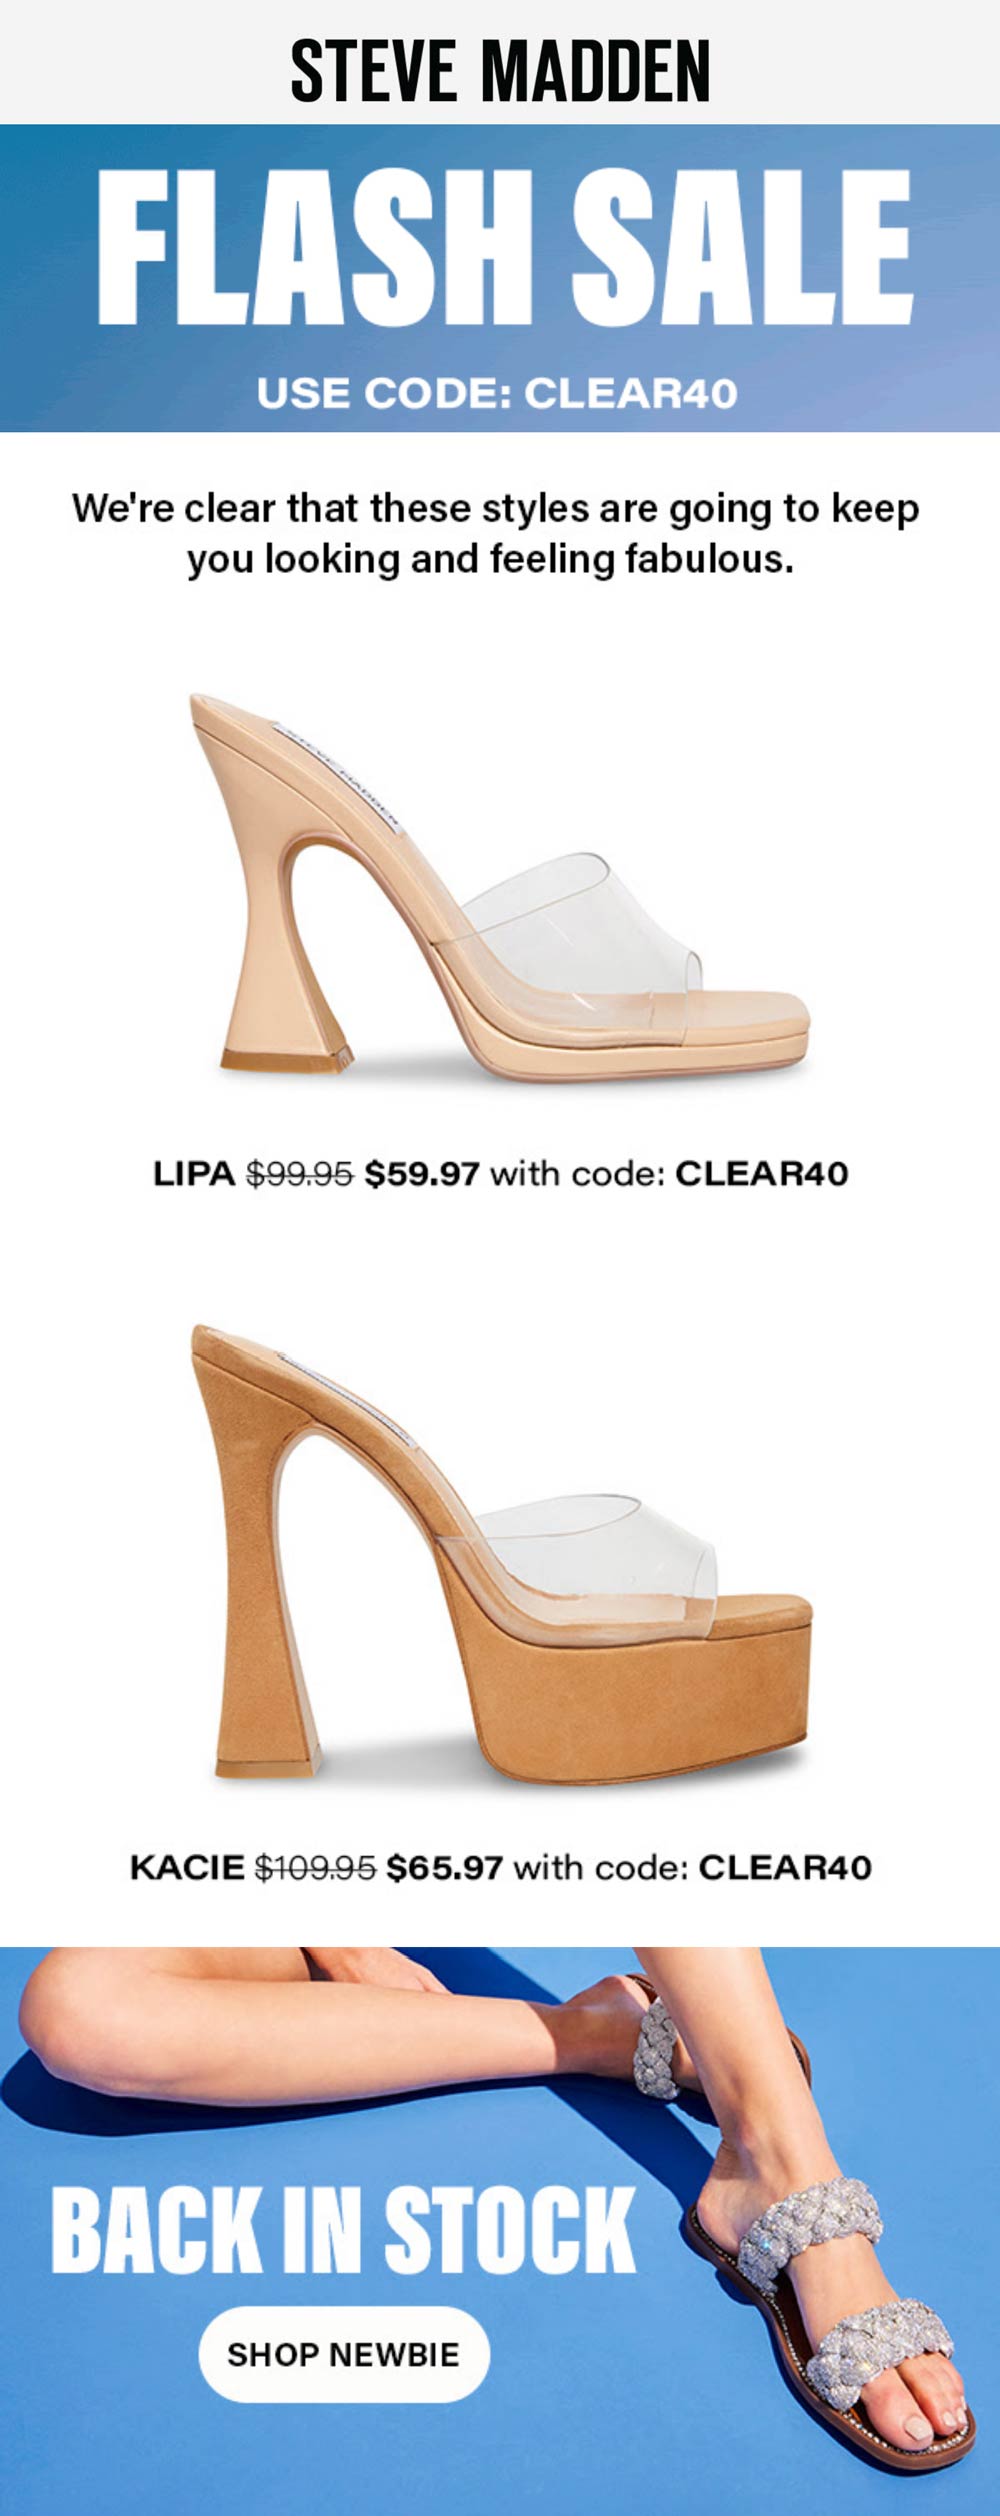 Steve Madden stores Coupon  40% off clear shoe styles today at Steve Madden via promo code CLEAR40 #stevemadden 